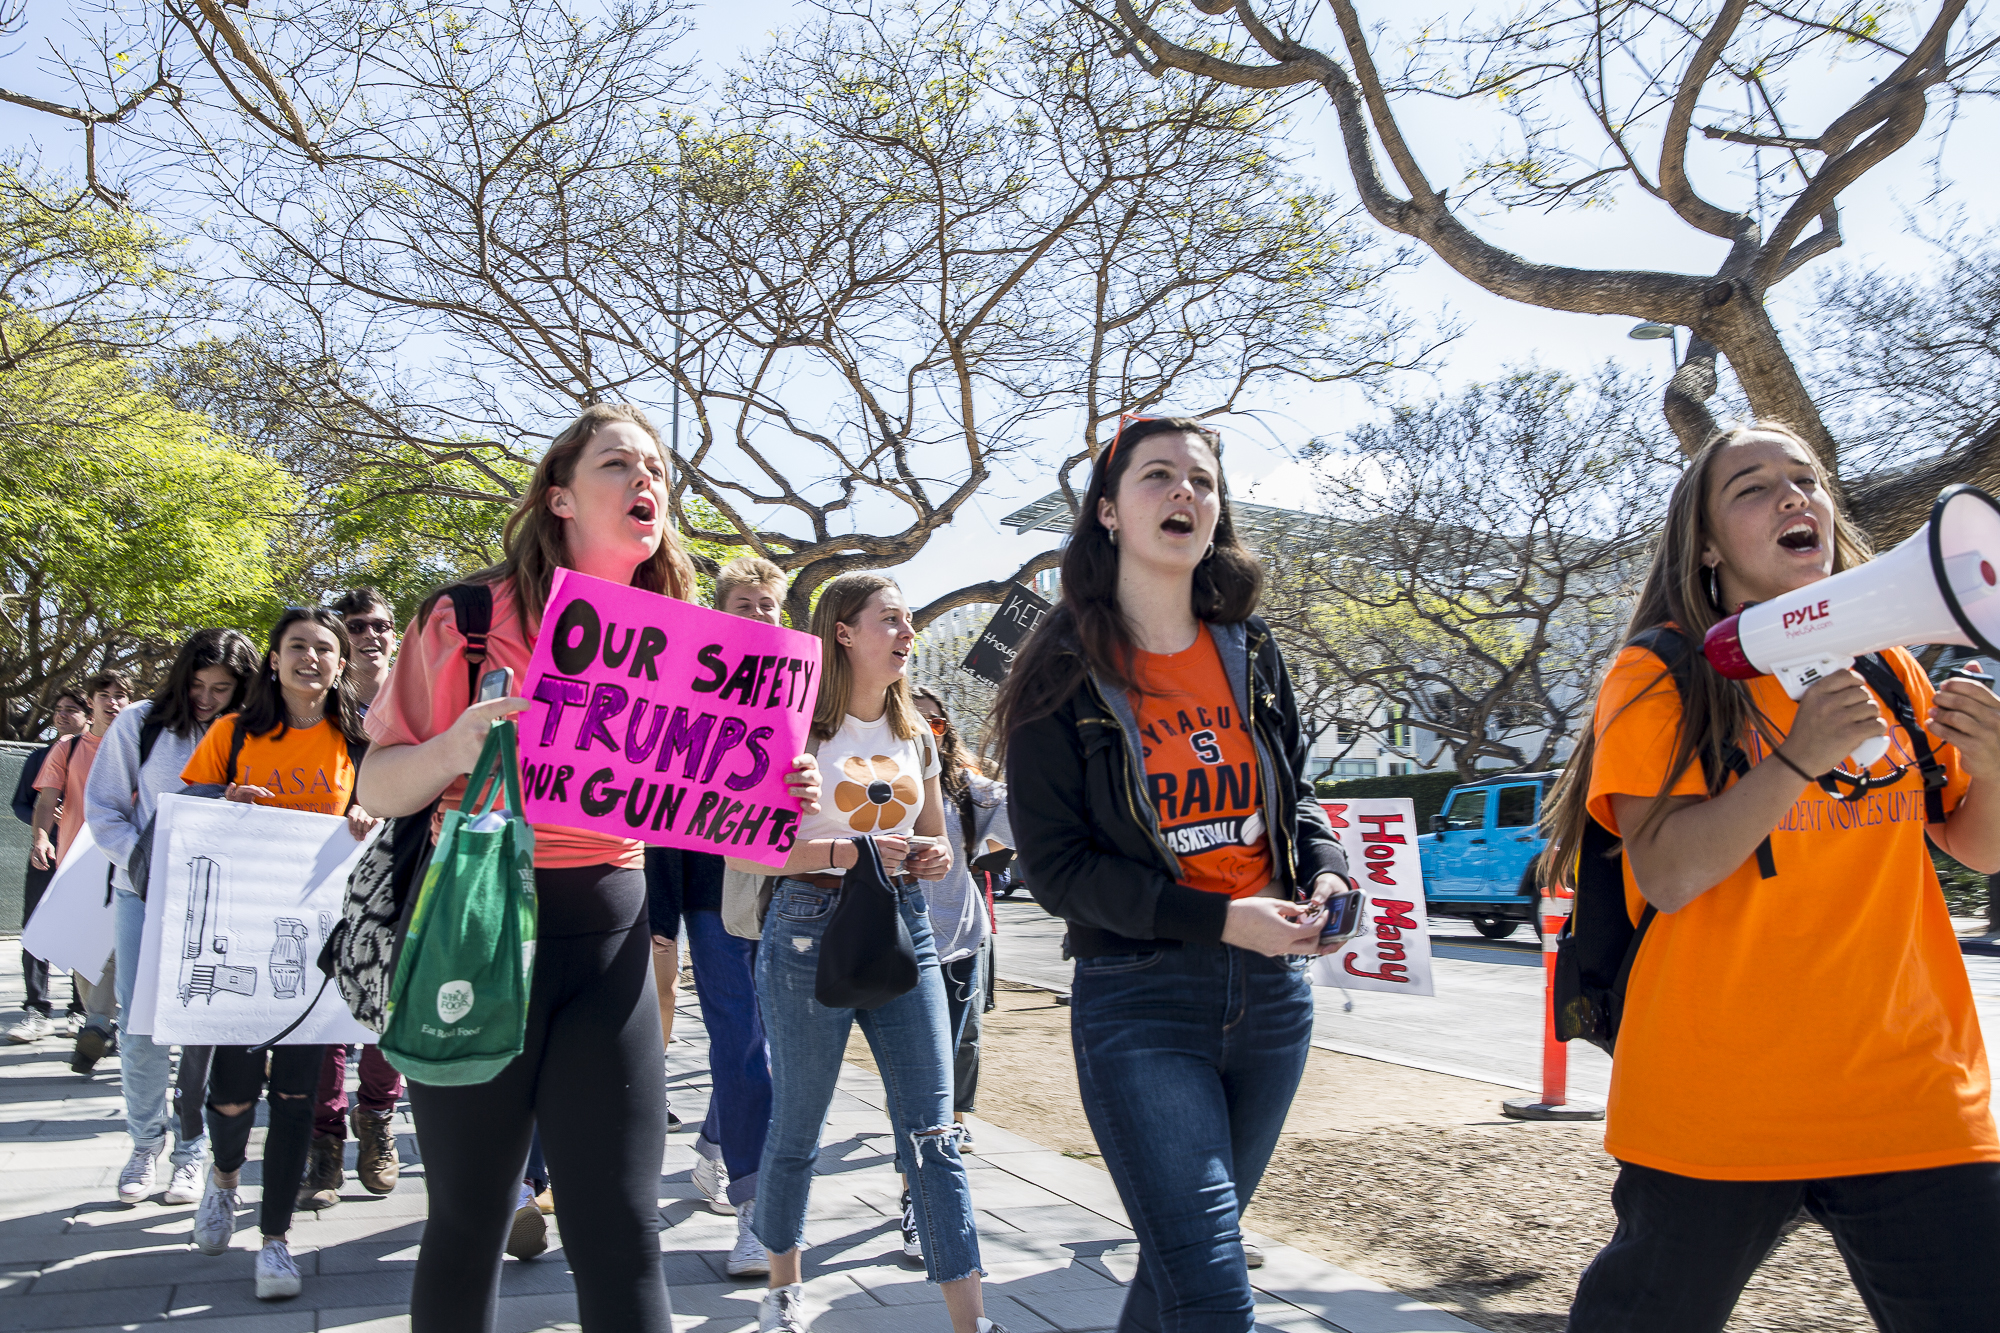  Santa Monica high school students walk down 4th street towards Santa Monica City Hall during the national student walkout that took place in Santa Monica, California on Friday, April 20 2018. Several hundred students from area high schools and middl